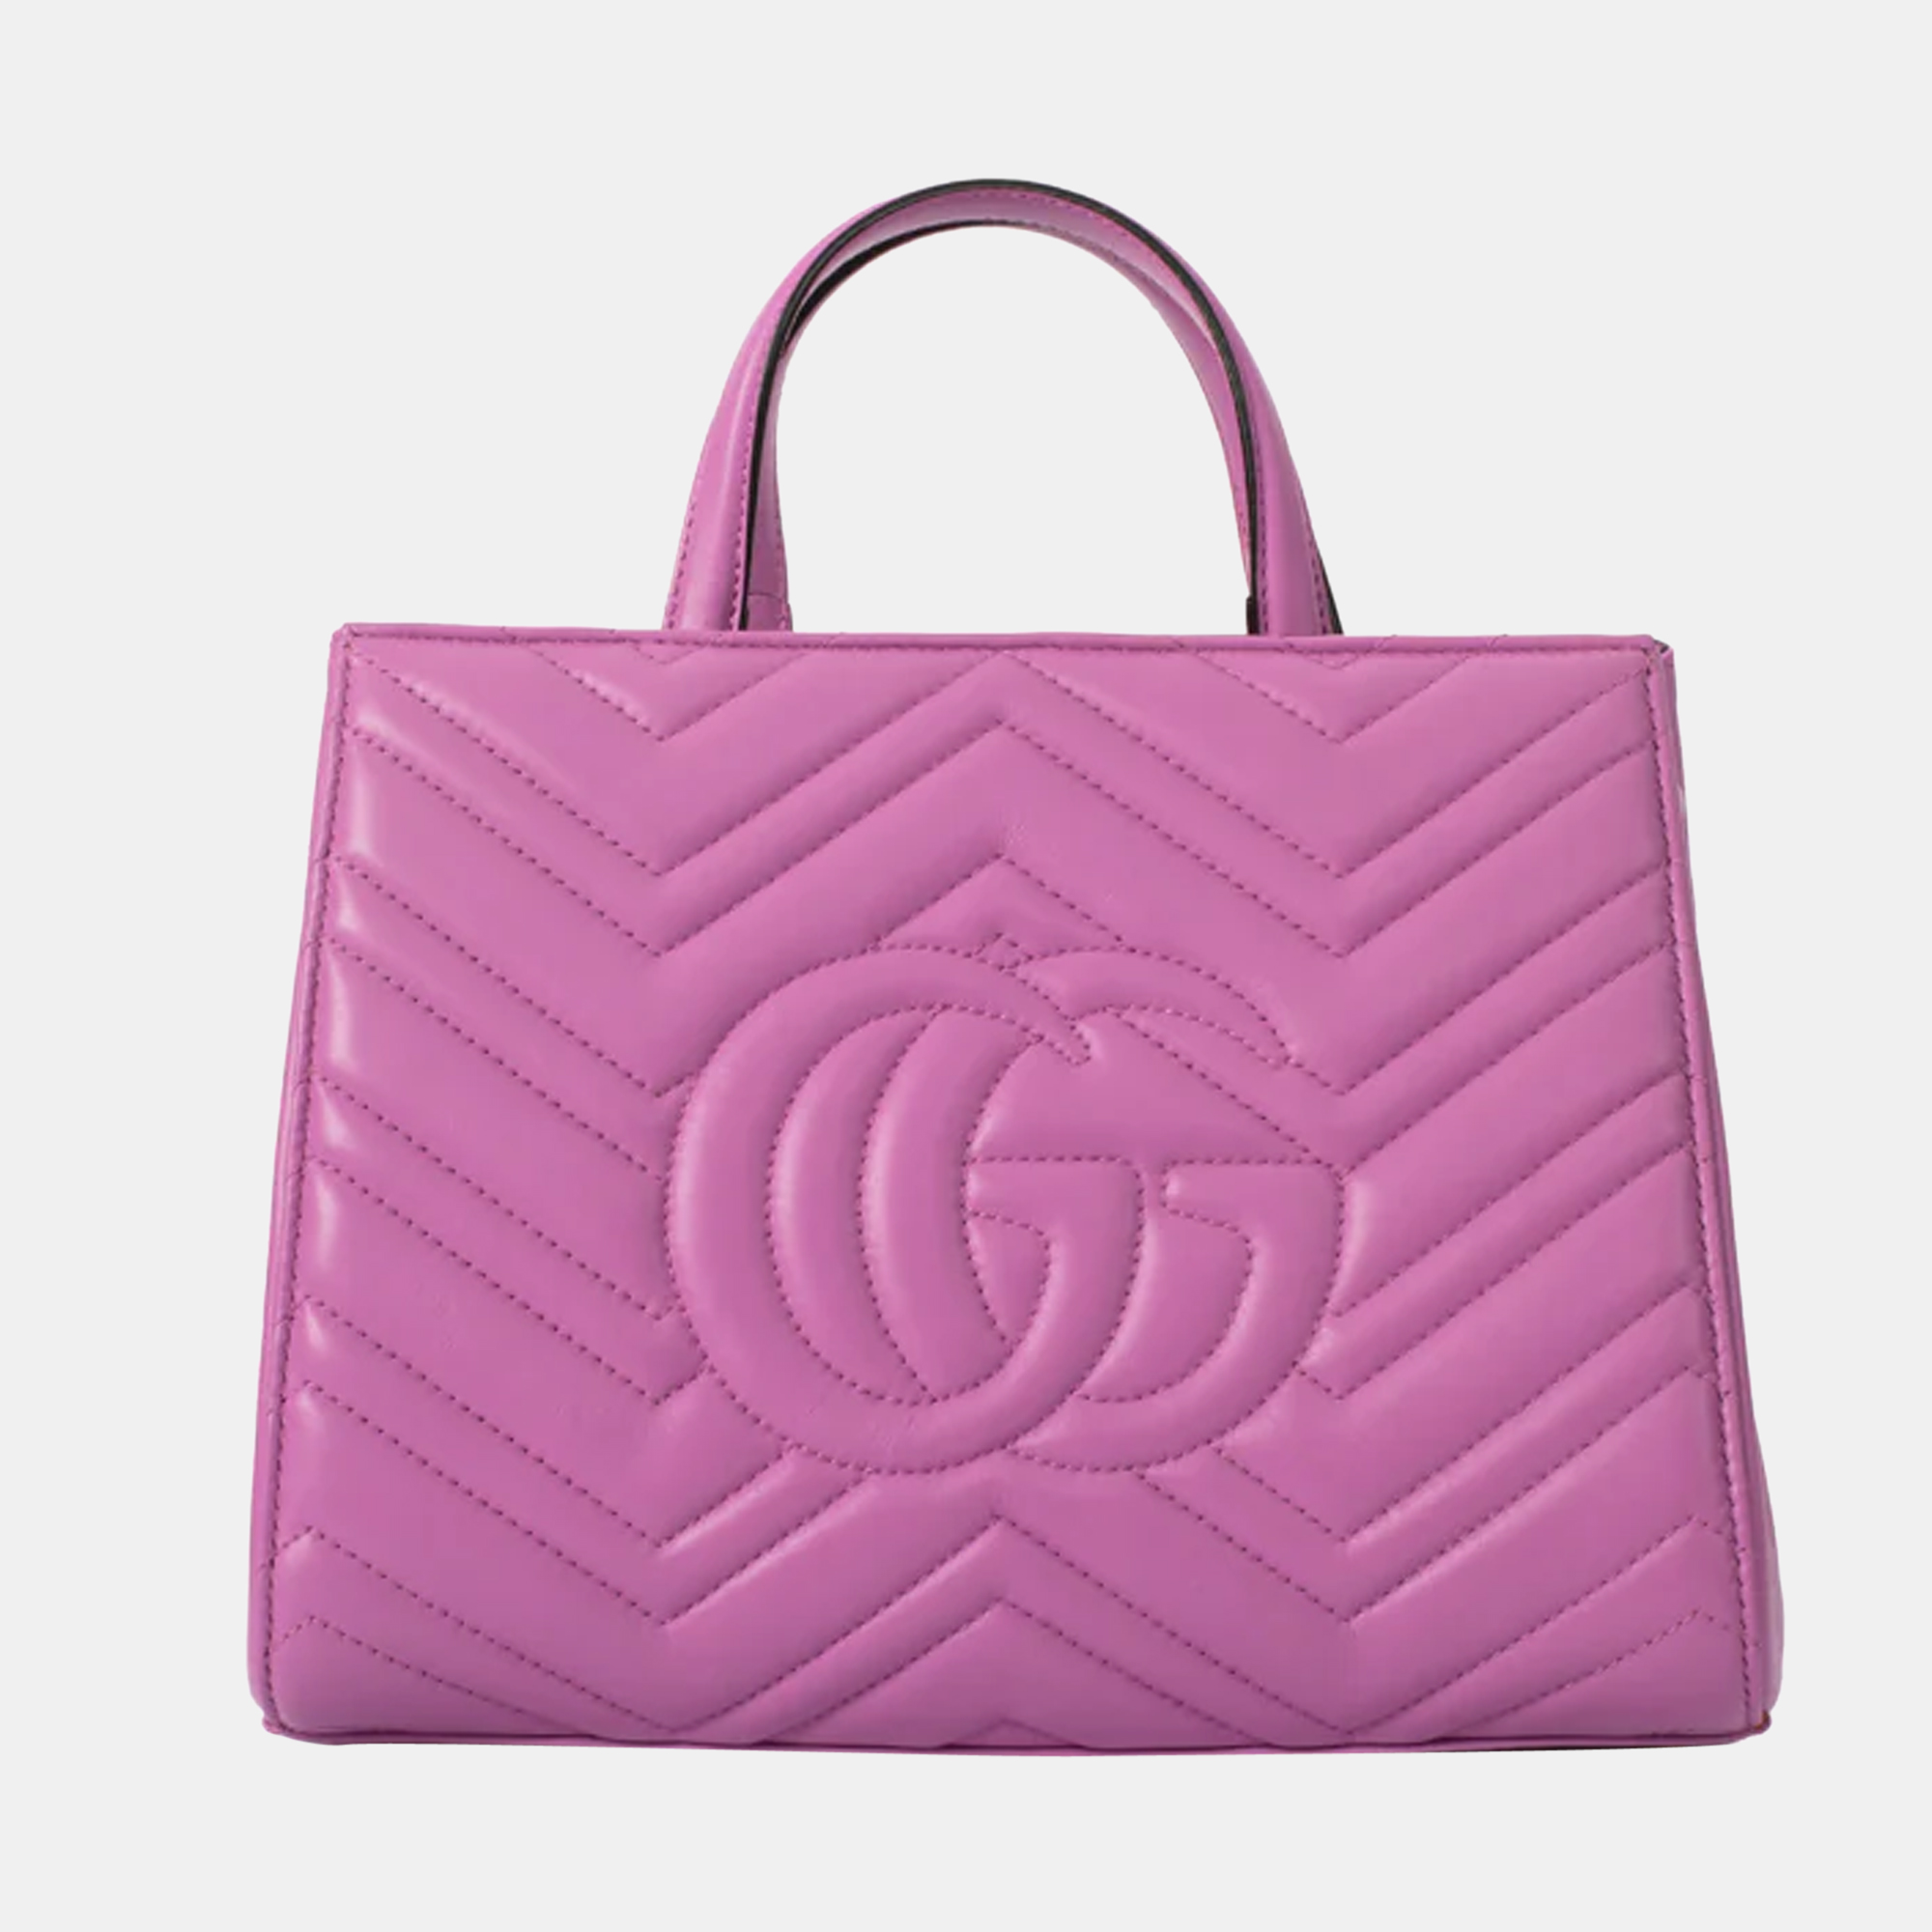 Gucci Marmont Tote Shoulder Bag In Pink Leather